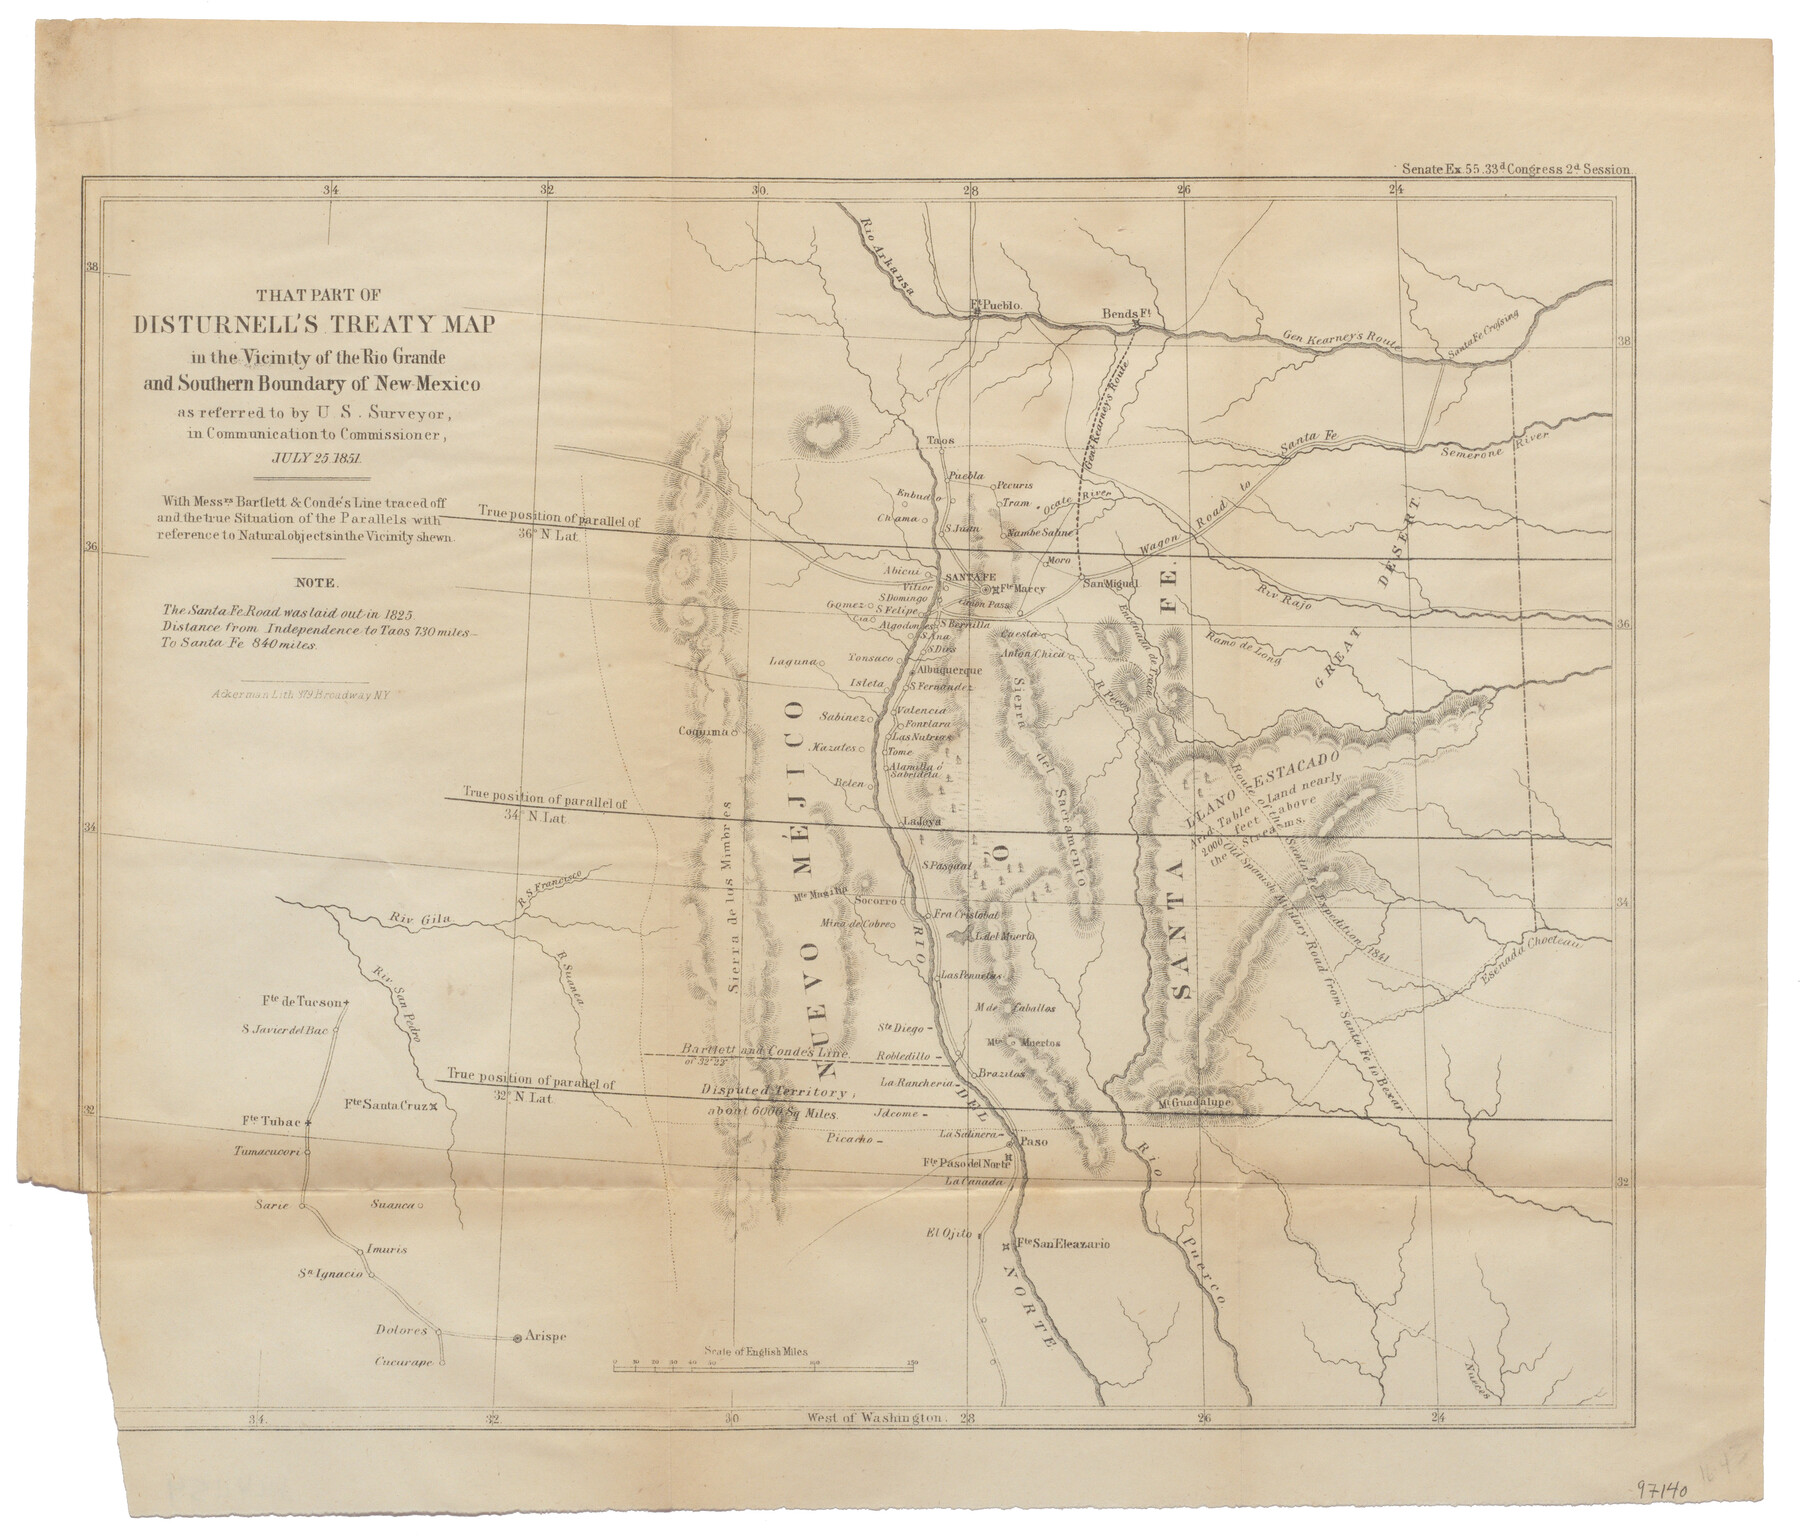 97140, That part of Disturnell's Treaty Map in the Vicinity of the Rio Grande and Southern Boundary of New Mexico, General Map Collection